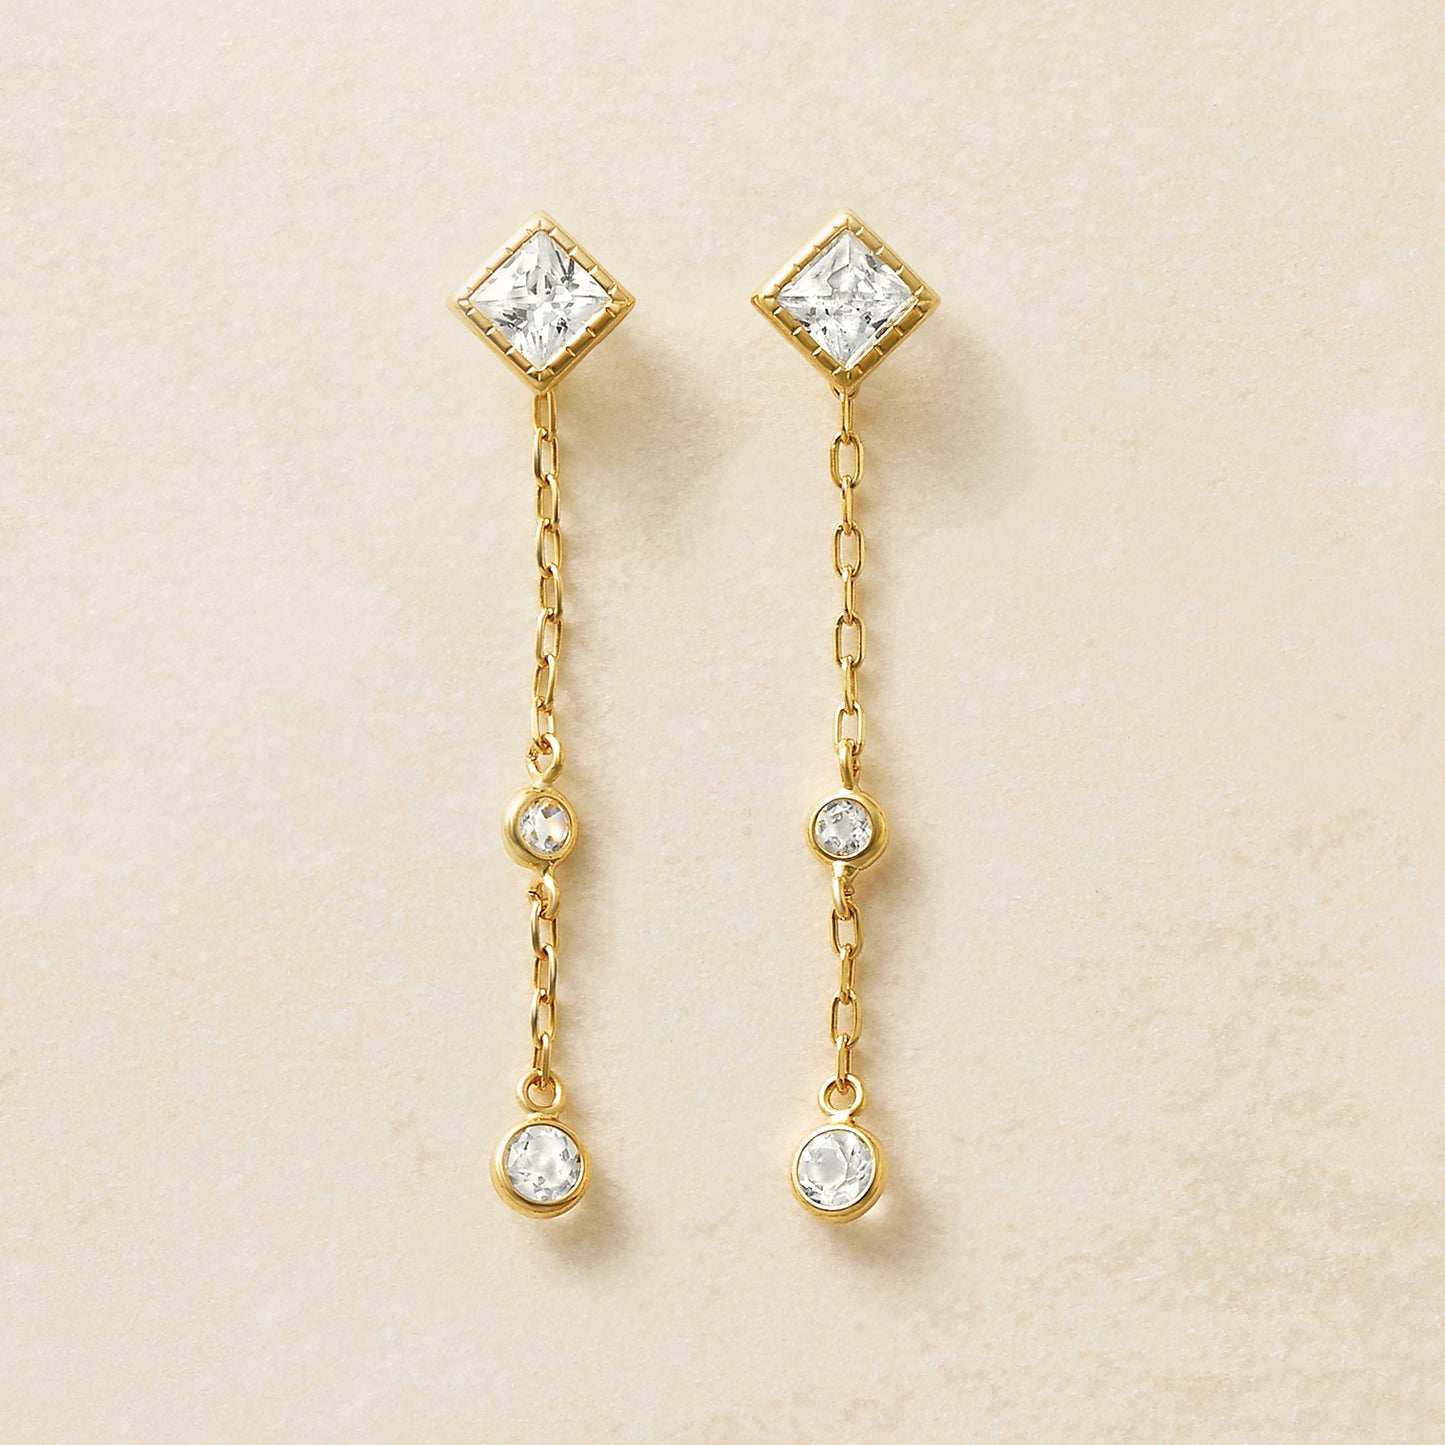 [Second Earrings] 18K Yellow Gold Cubic Zirconia Square Cut Earrings - Product Image